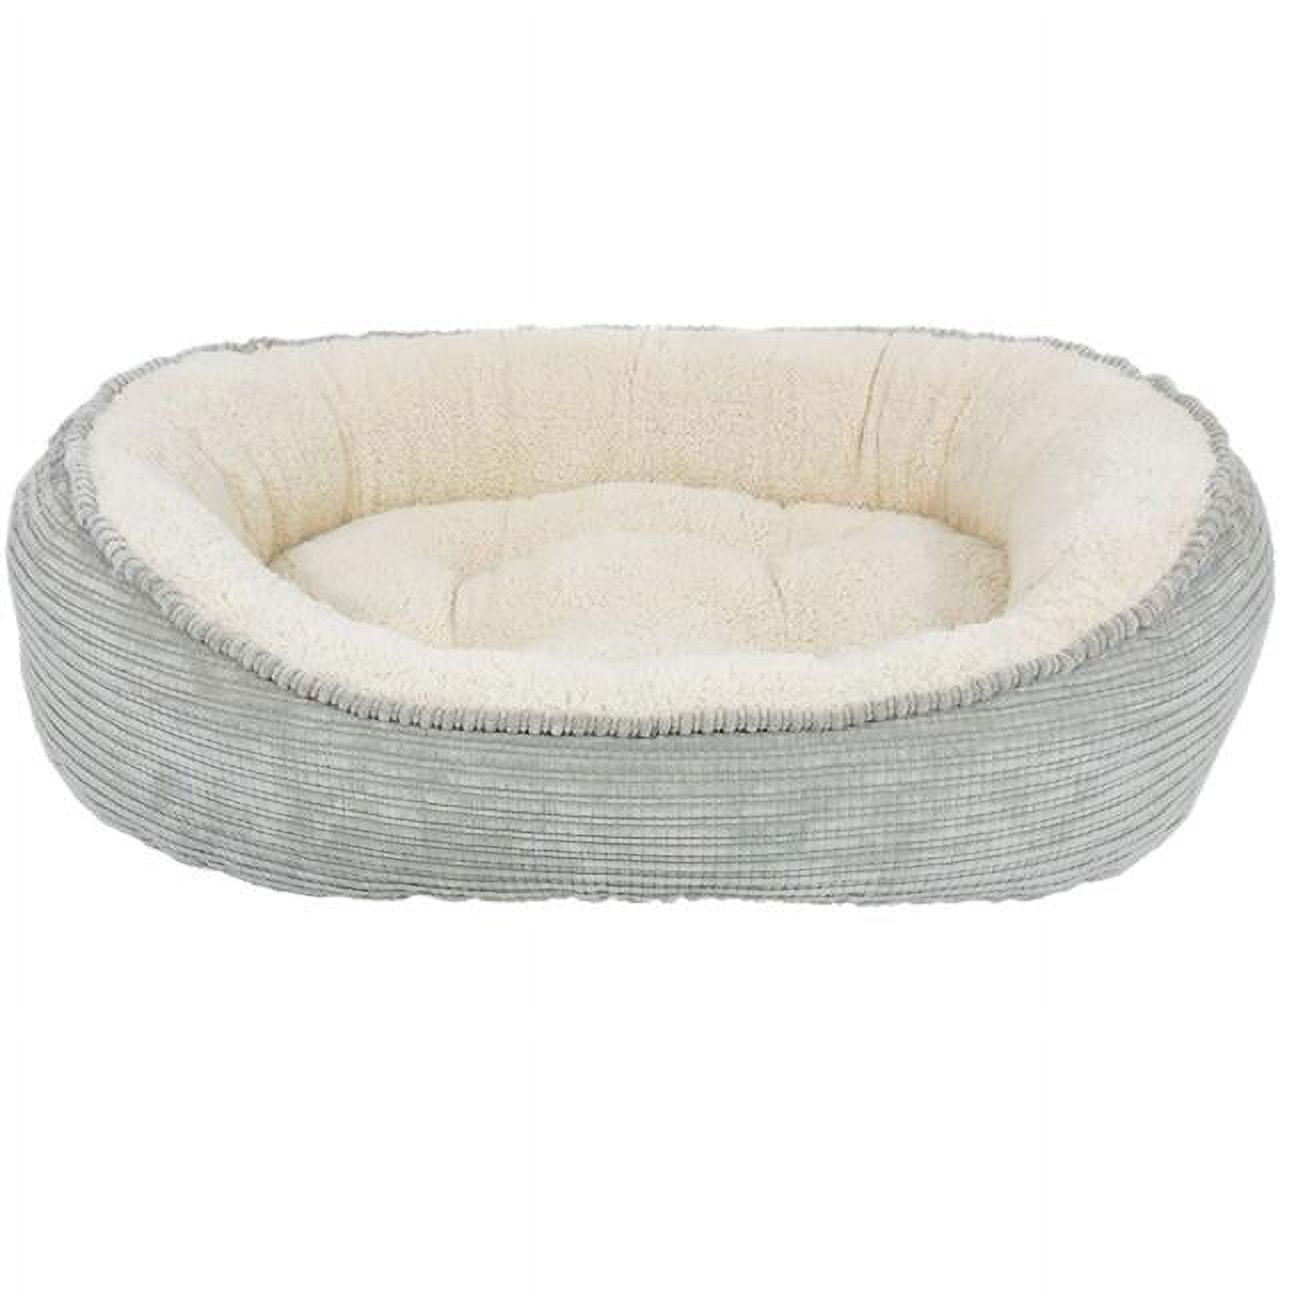 Picture of Arlee Home Fashions AR07246 Cody Cuddler Cat Bed - Grey, Large